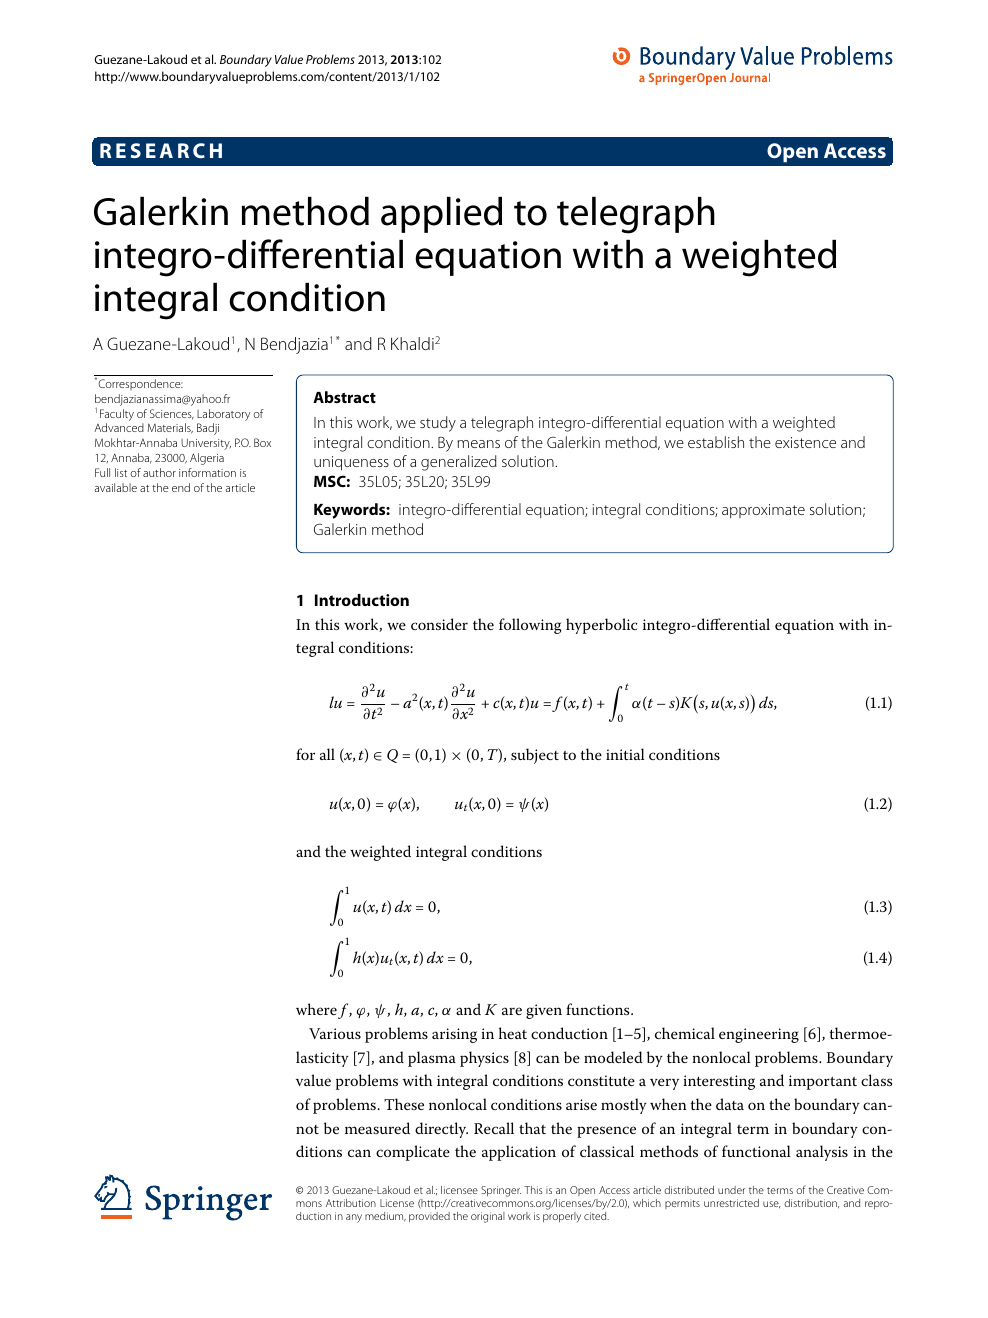 Galerkin Method Applied To Telegraph Integro Differential Equation With A Weighted Integral Condition Topic Of Research Paper In Mathematics Download Scholarly Article Pdf And Read For Free On Cyberleninka Open Science Hub